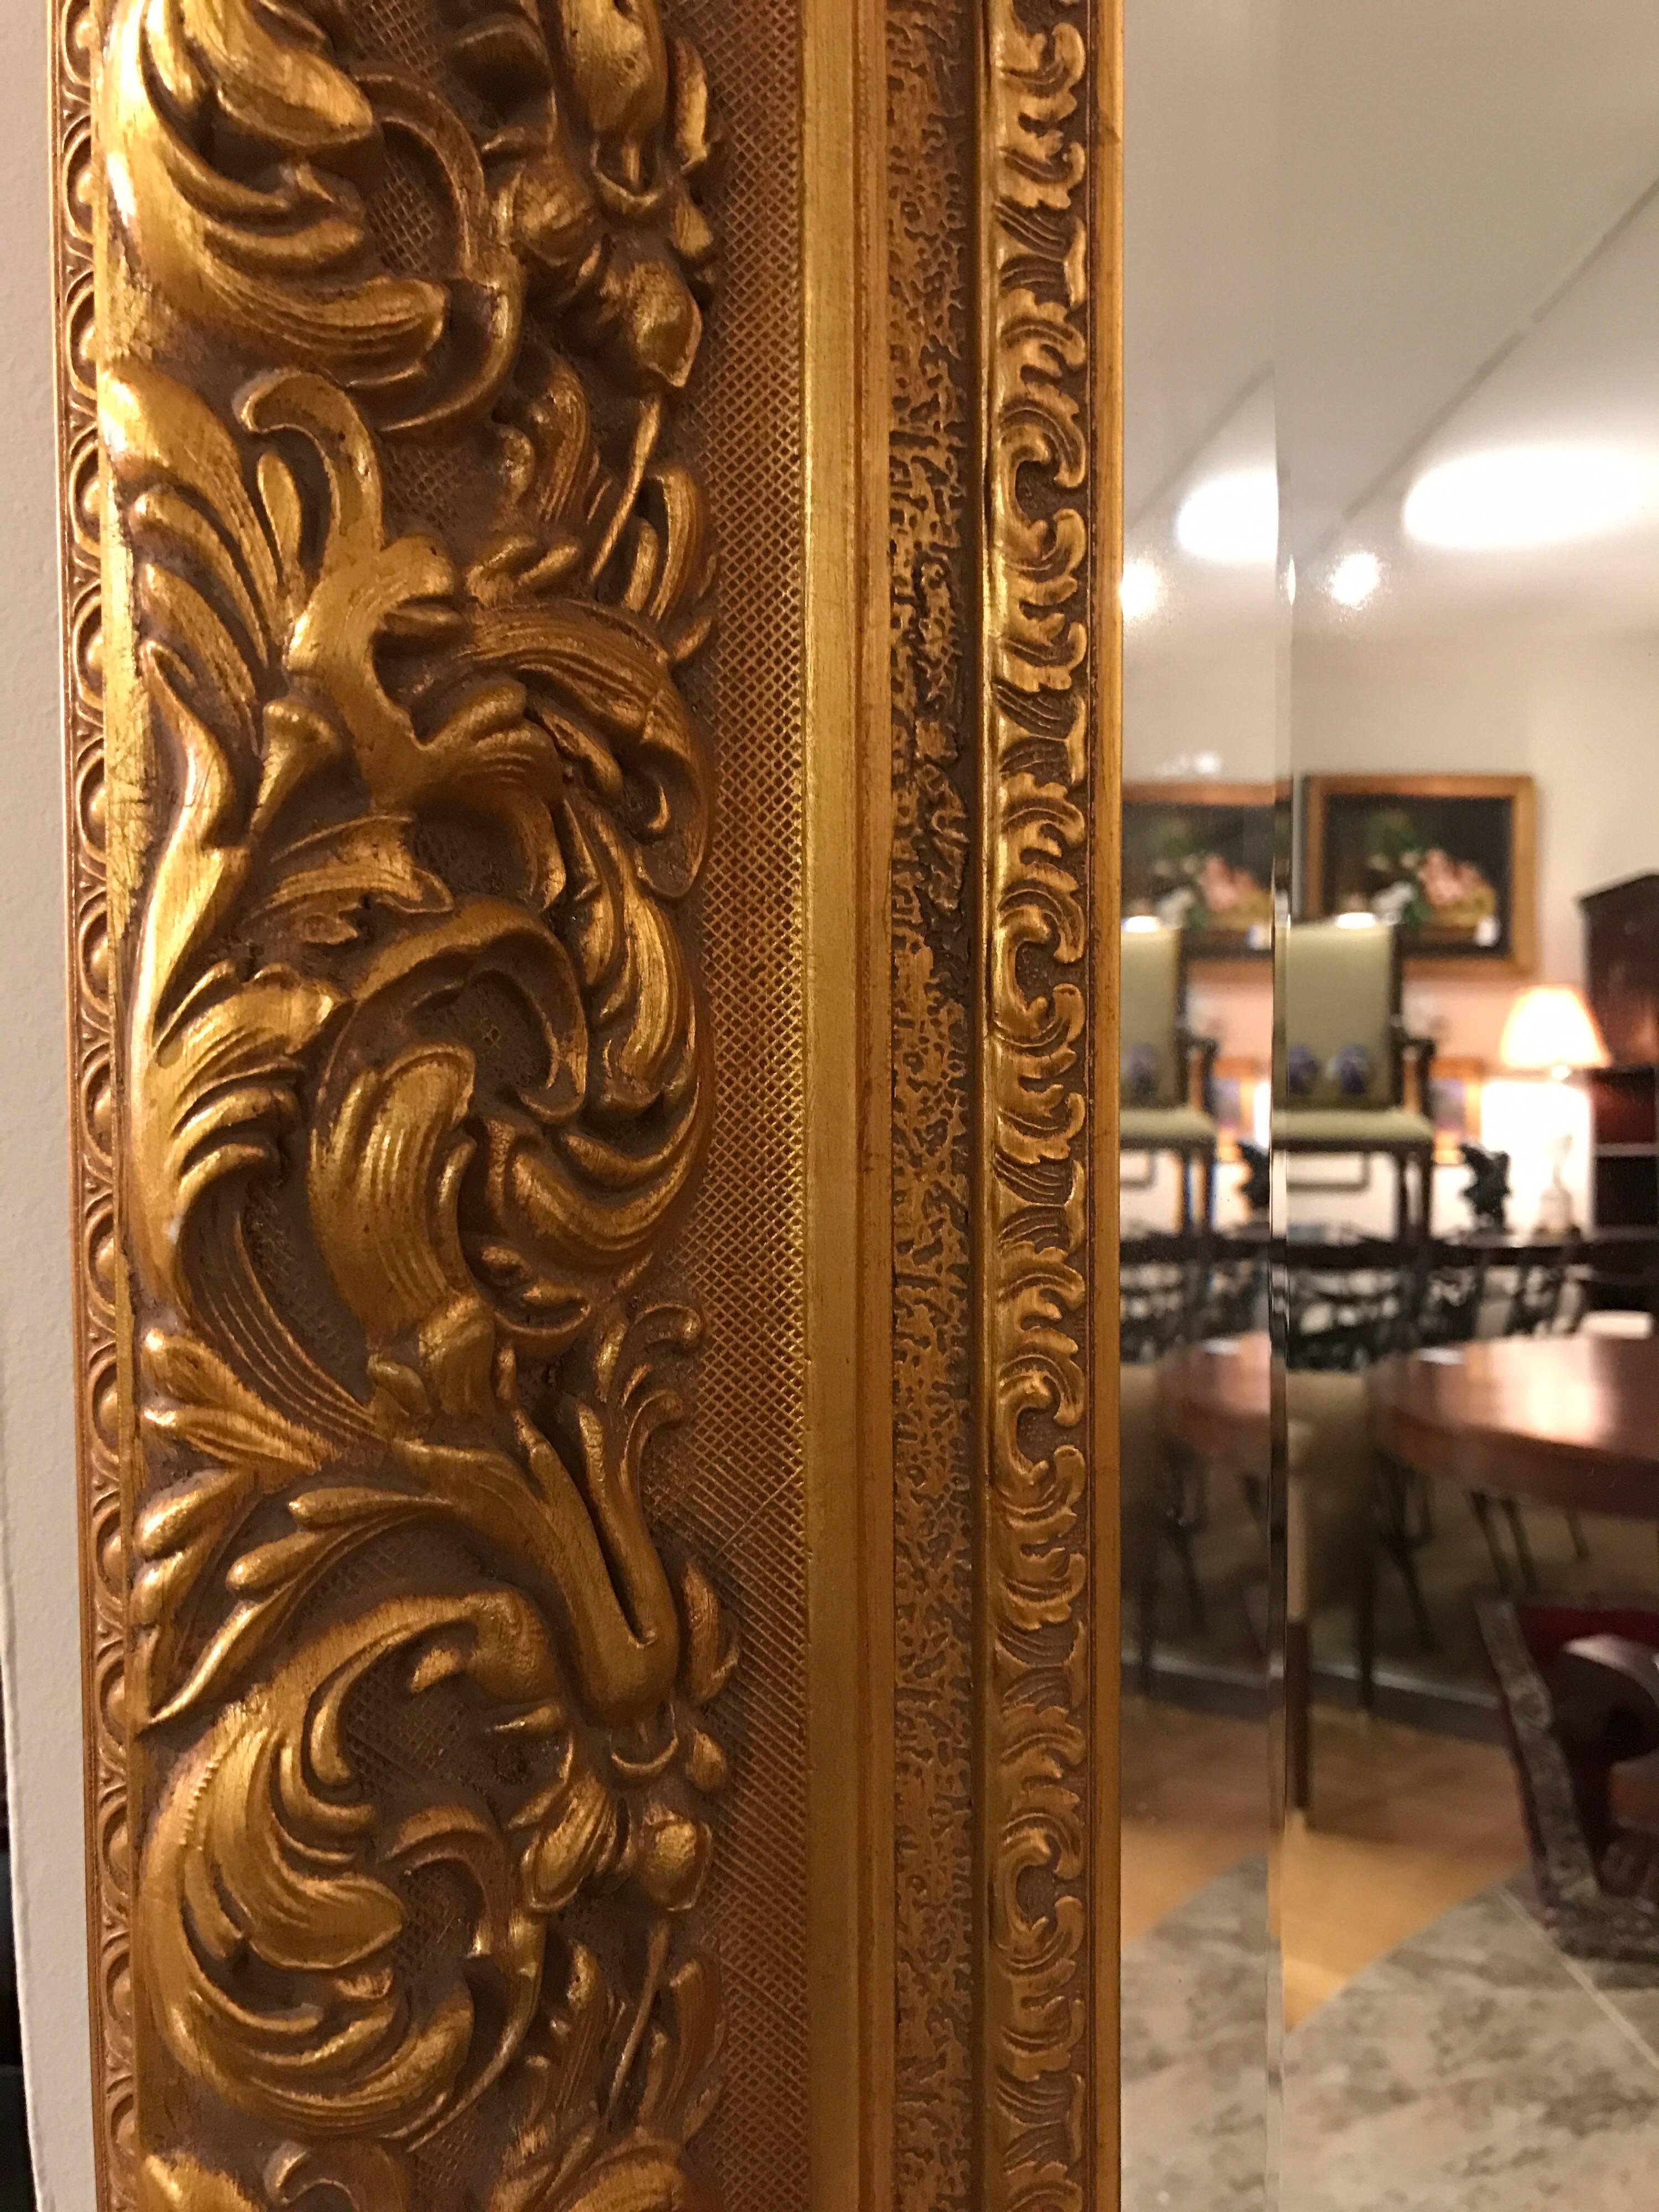 Stunning La Barge gilt wood carved full length floor mirror.  Mirror is beveled, carvings are ultra ornate and condition is mint!